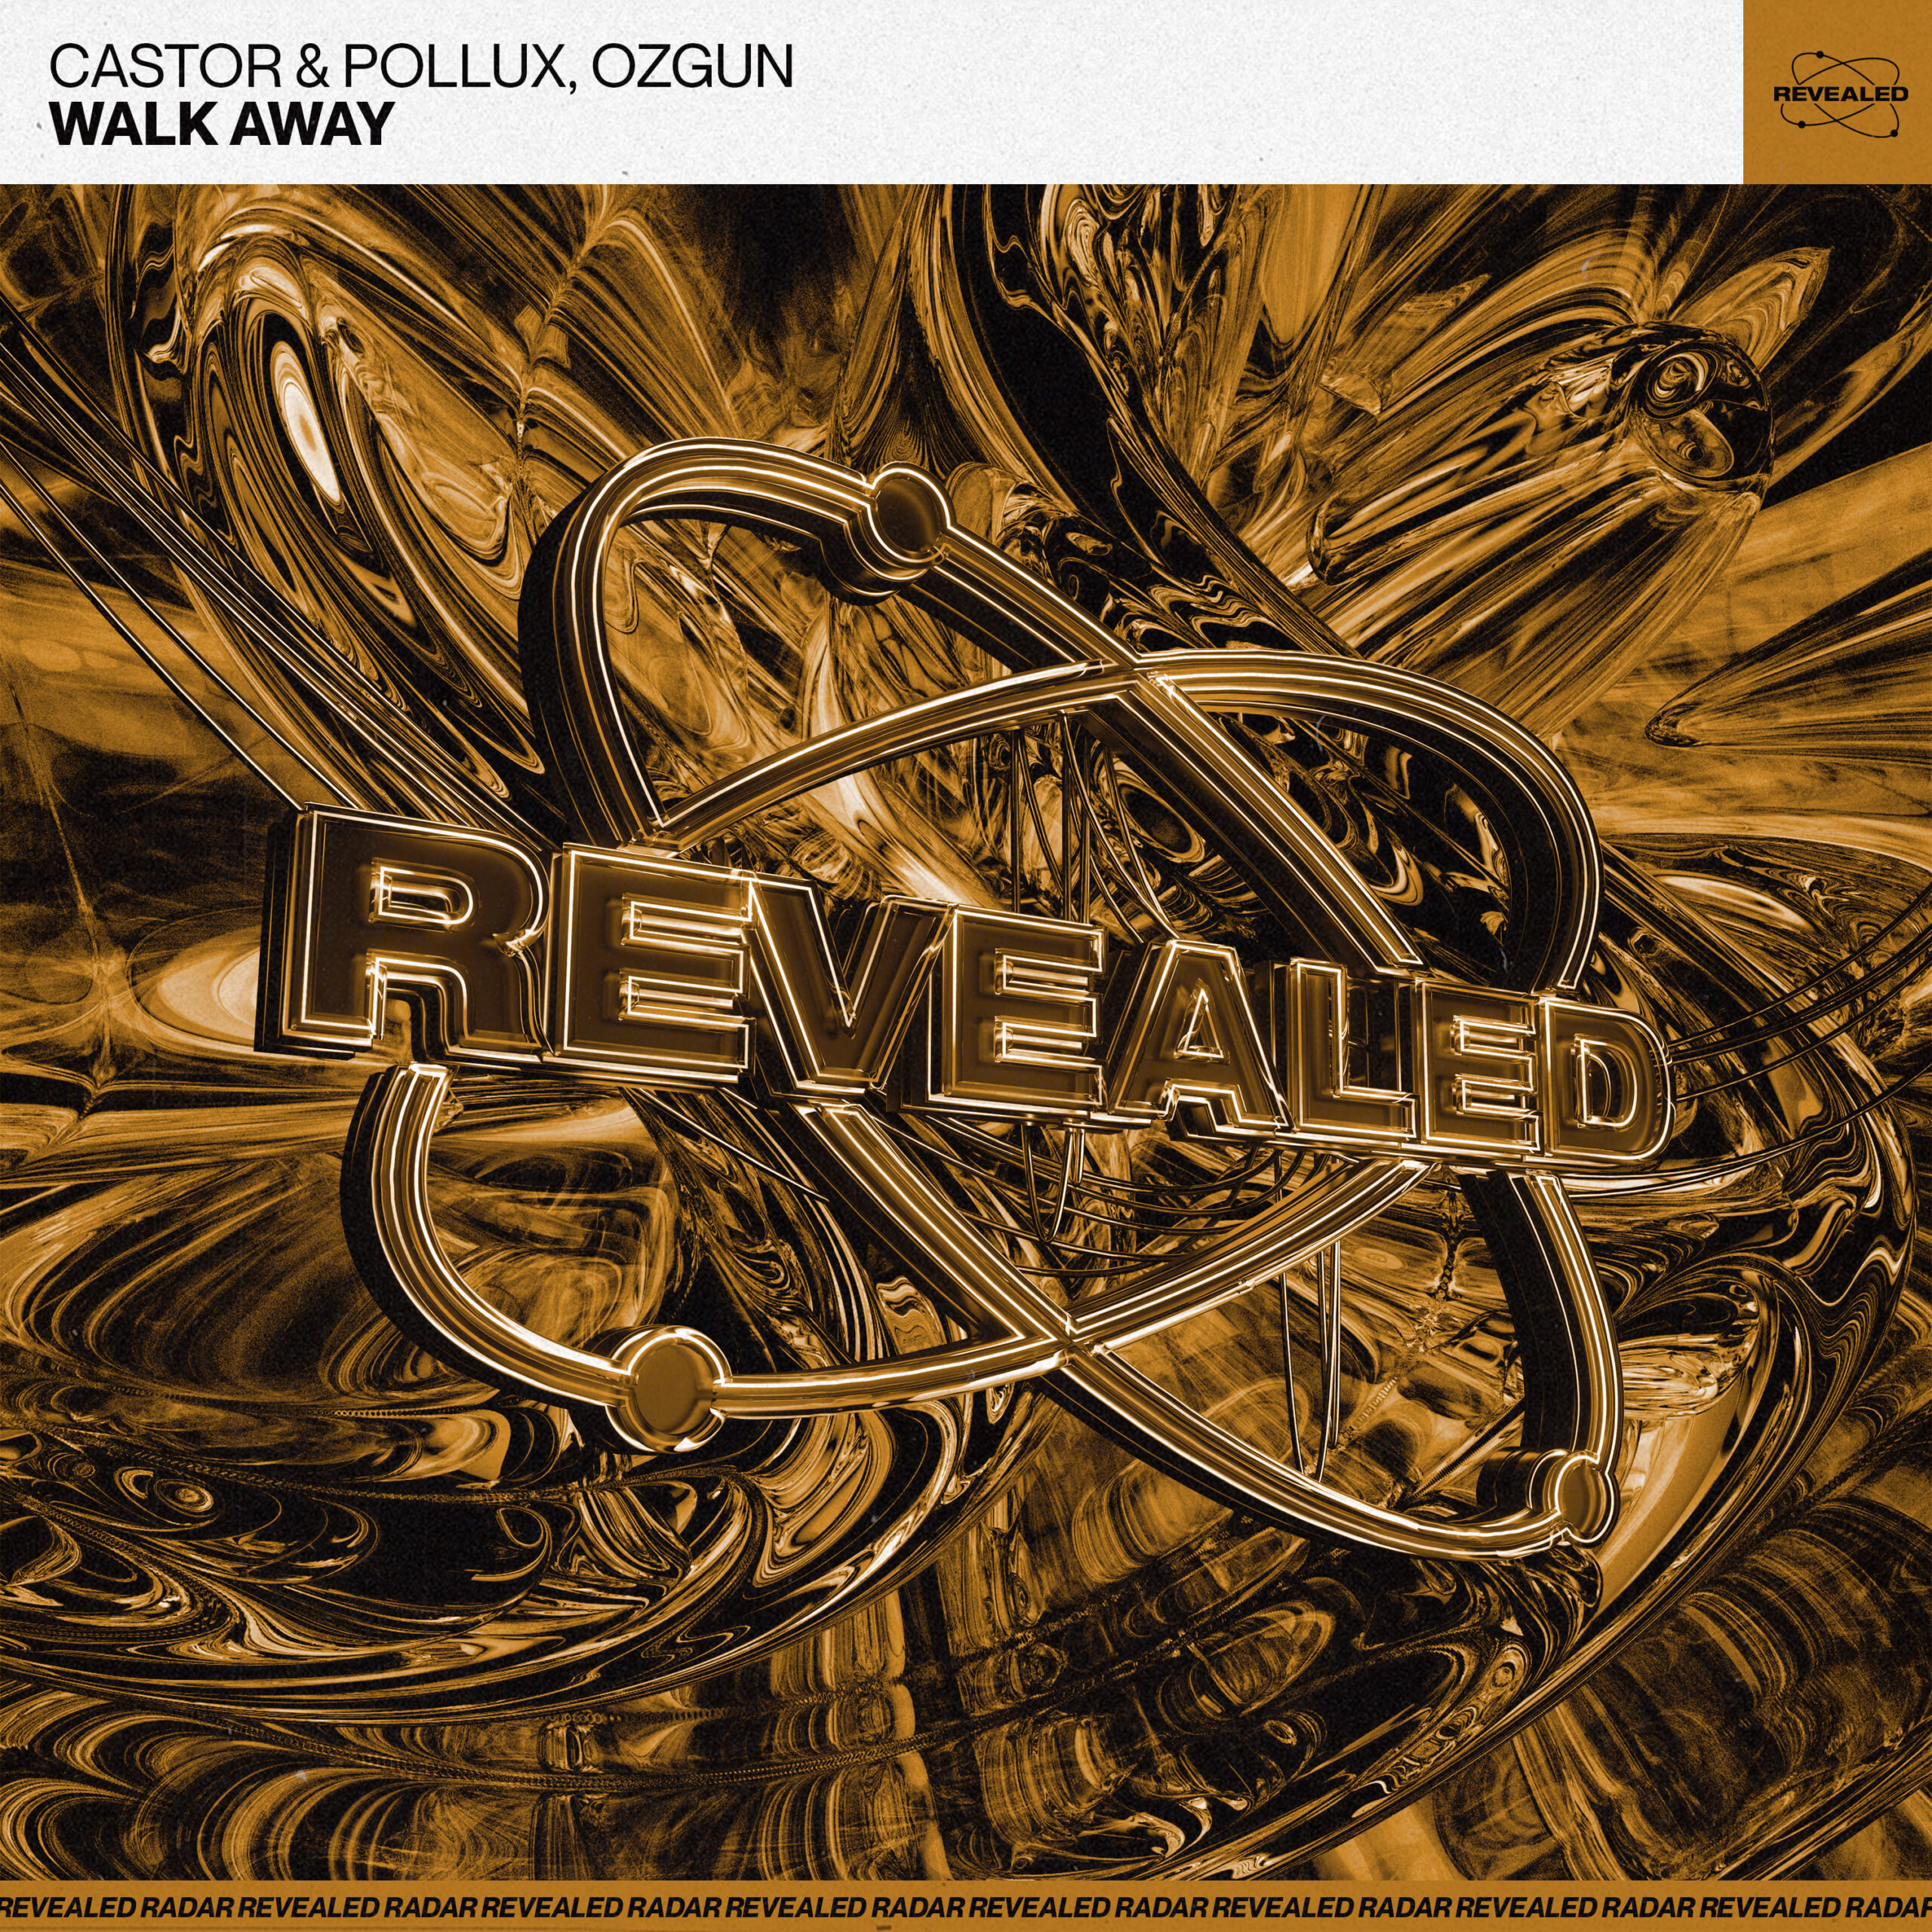 Castor & Pollux Team Up with Producer Ozgun for Uplifting Track 'Walk Away'